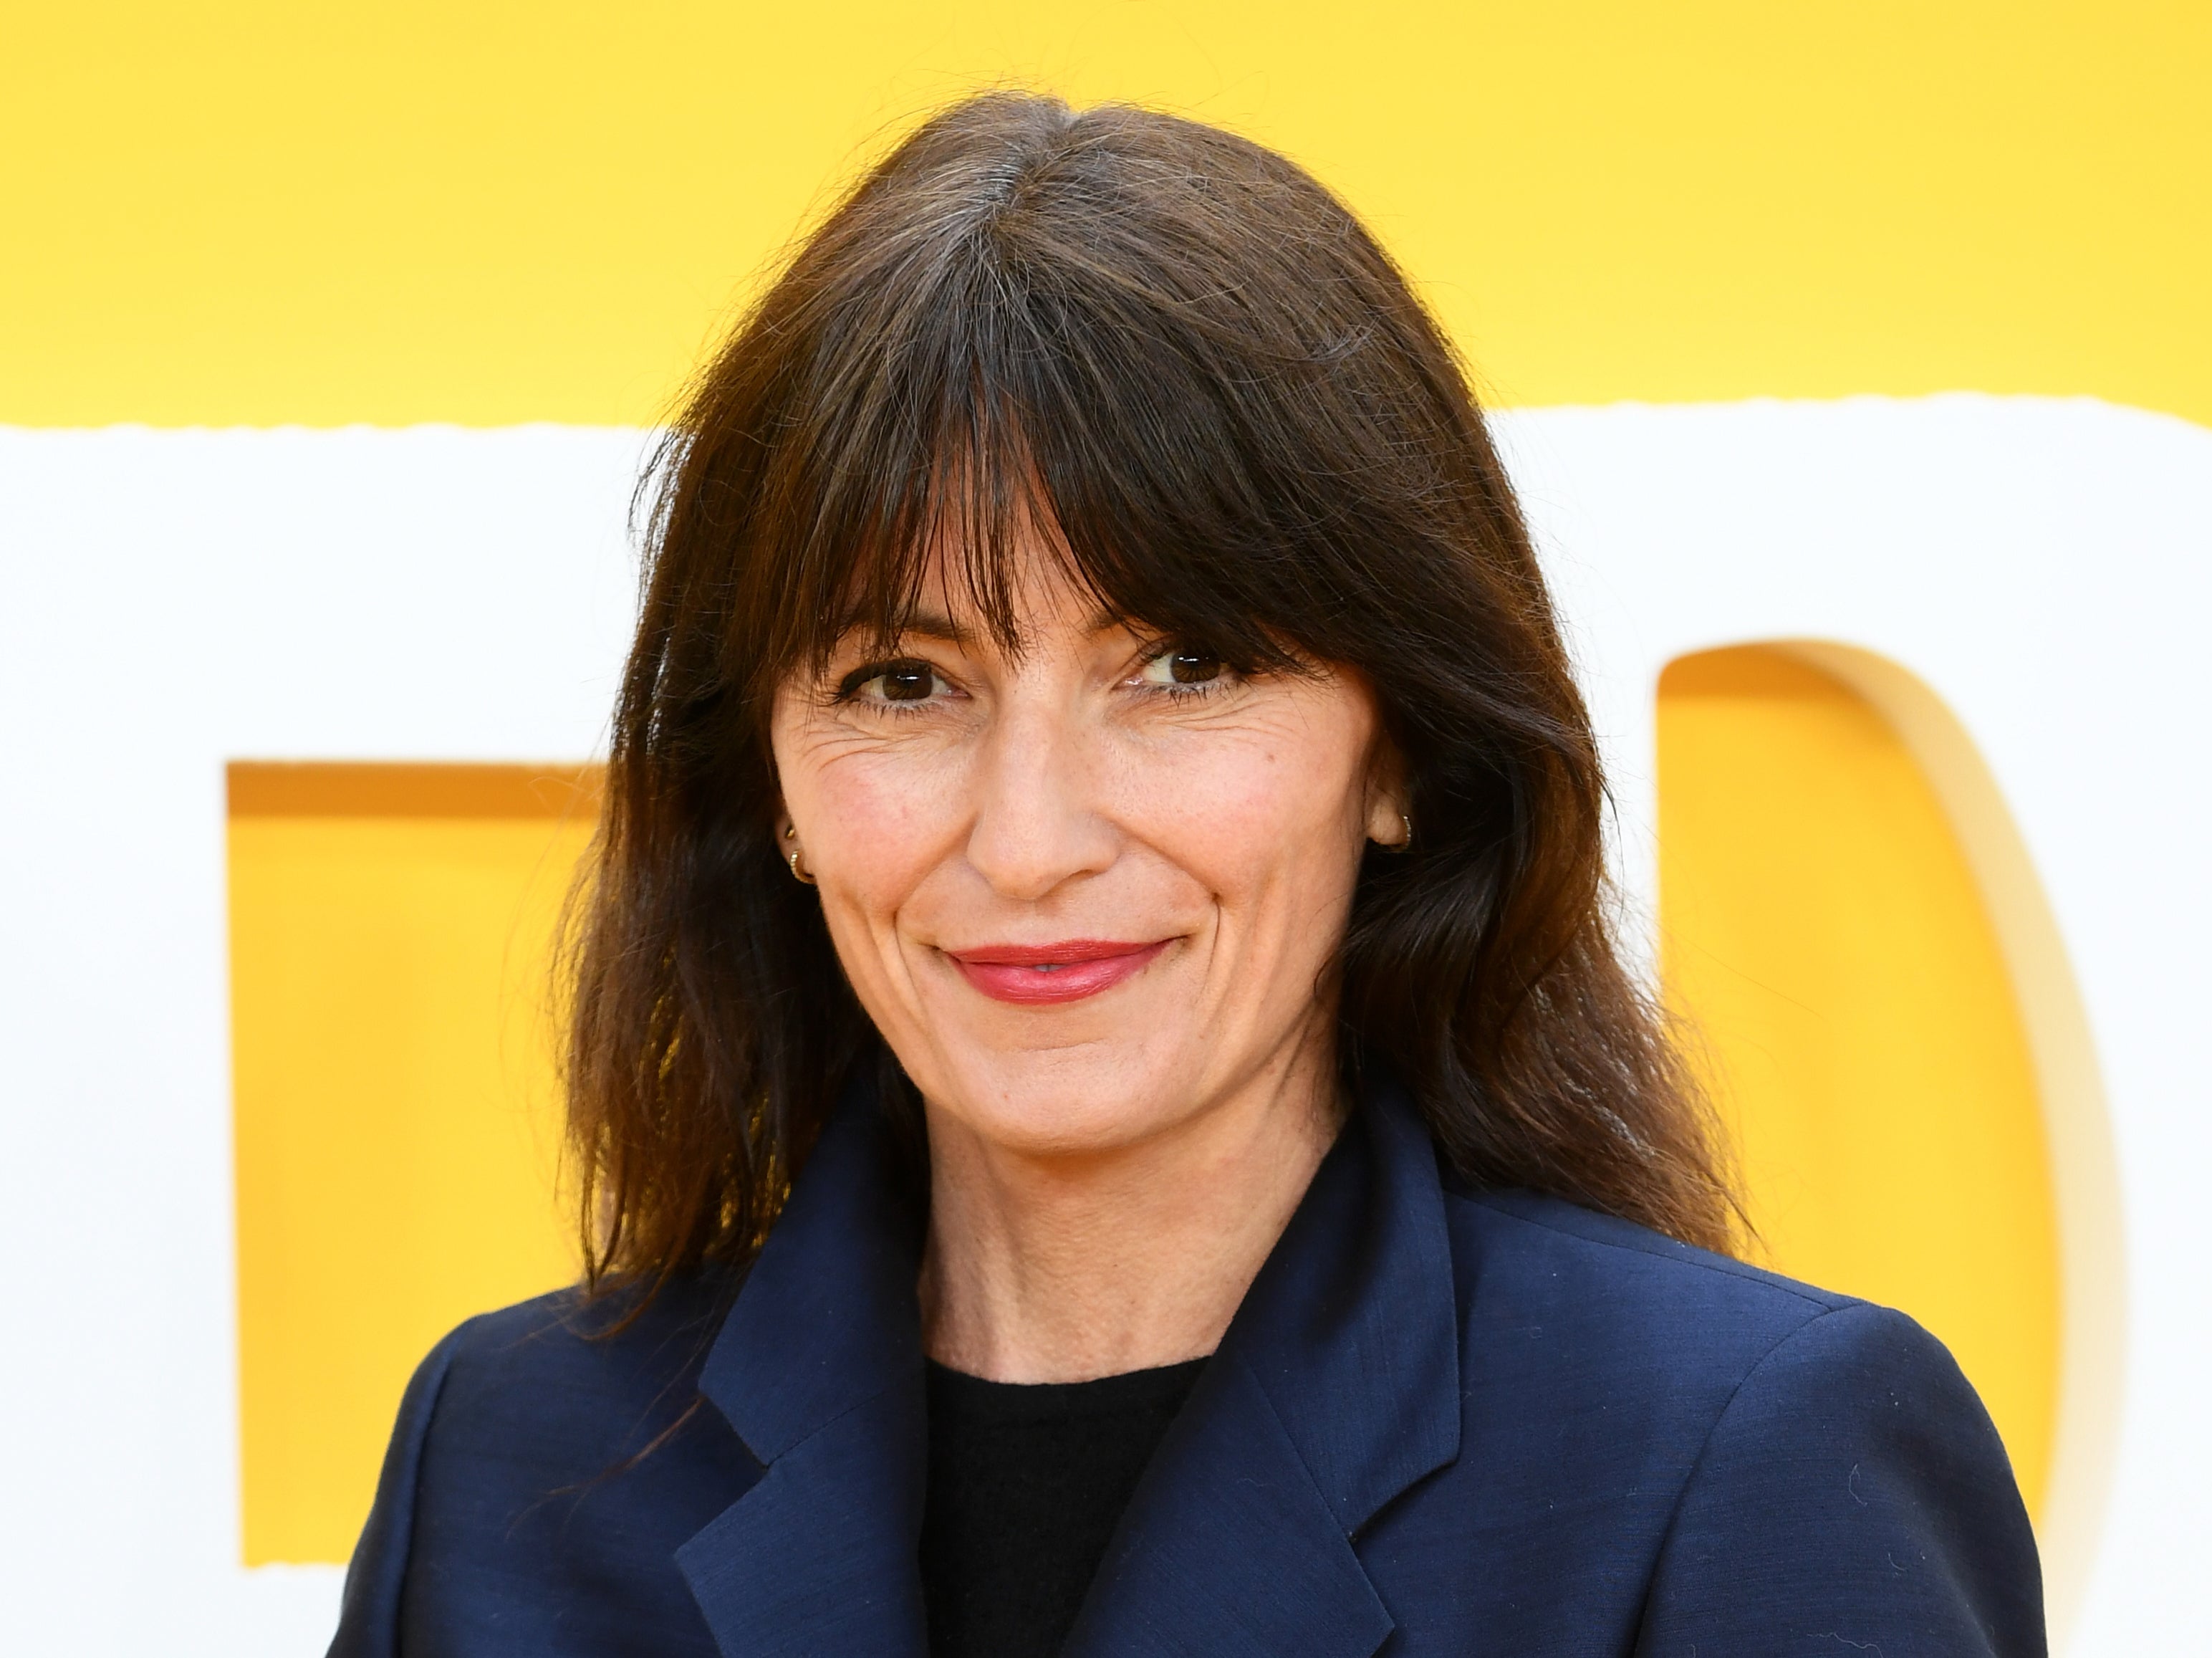 Davina McCall experienced menopause at the age of 44